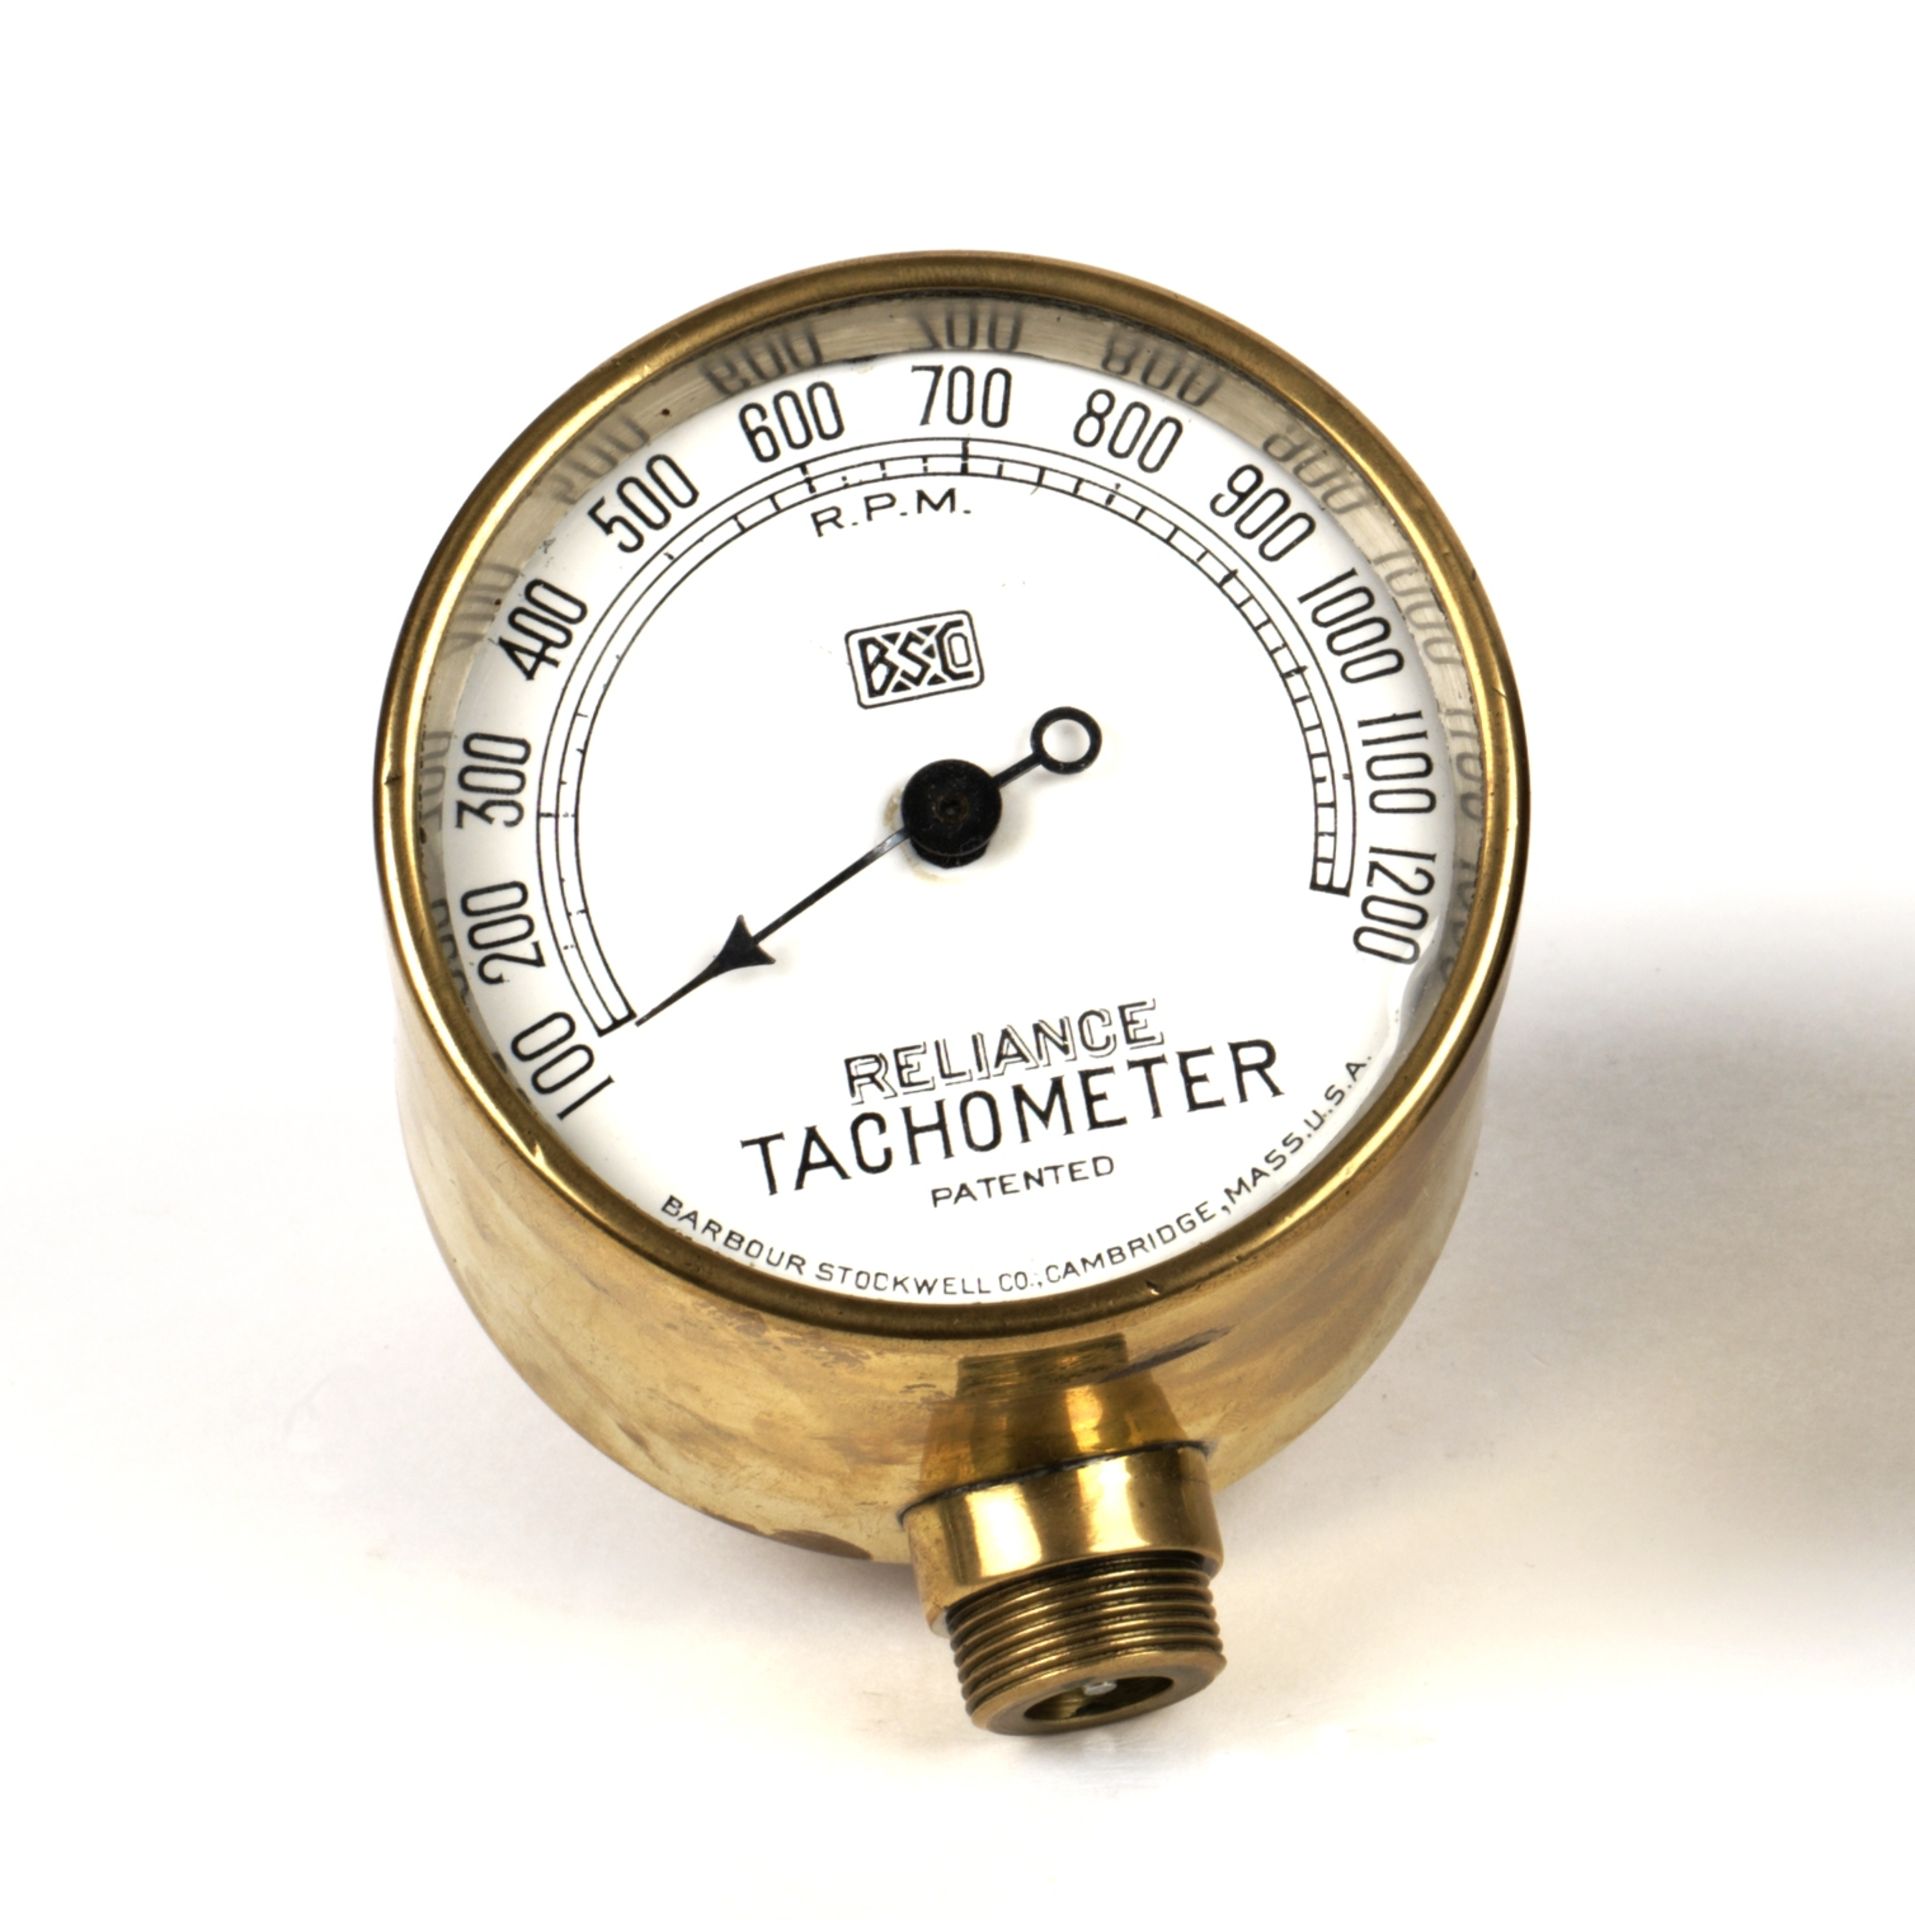 A Reliance Tachometer by Barbour Stockwell Co of Cambridge Mass, American, circa 1910,